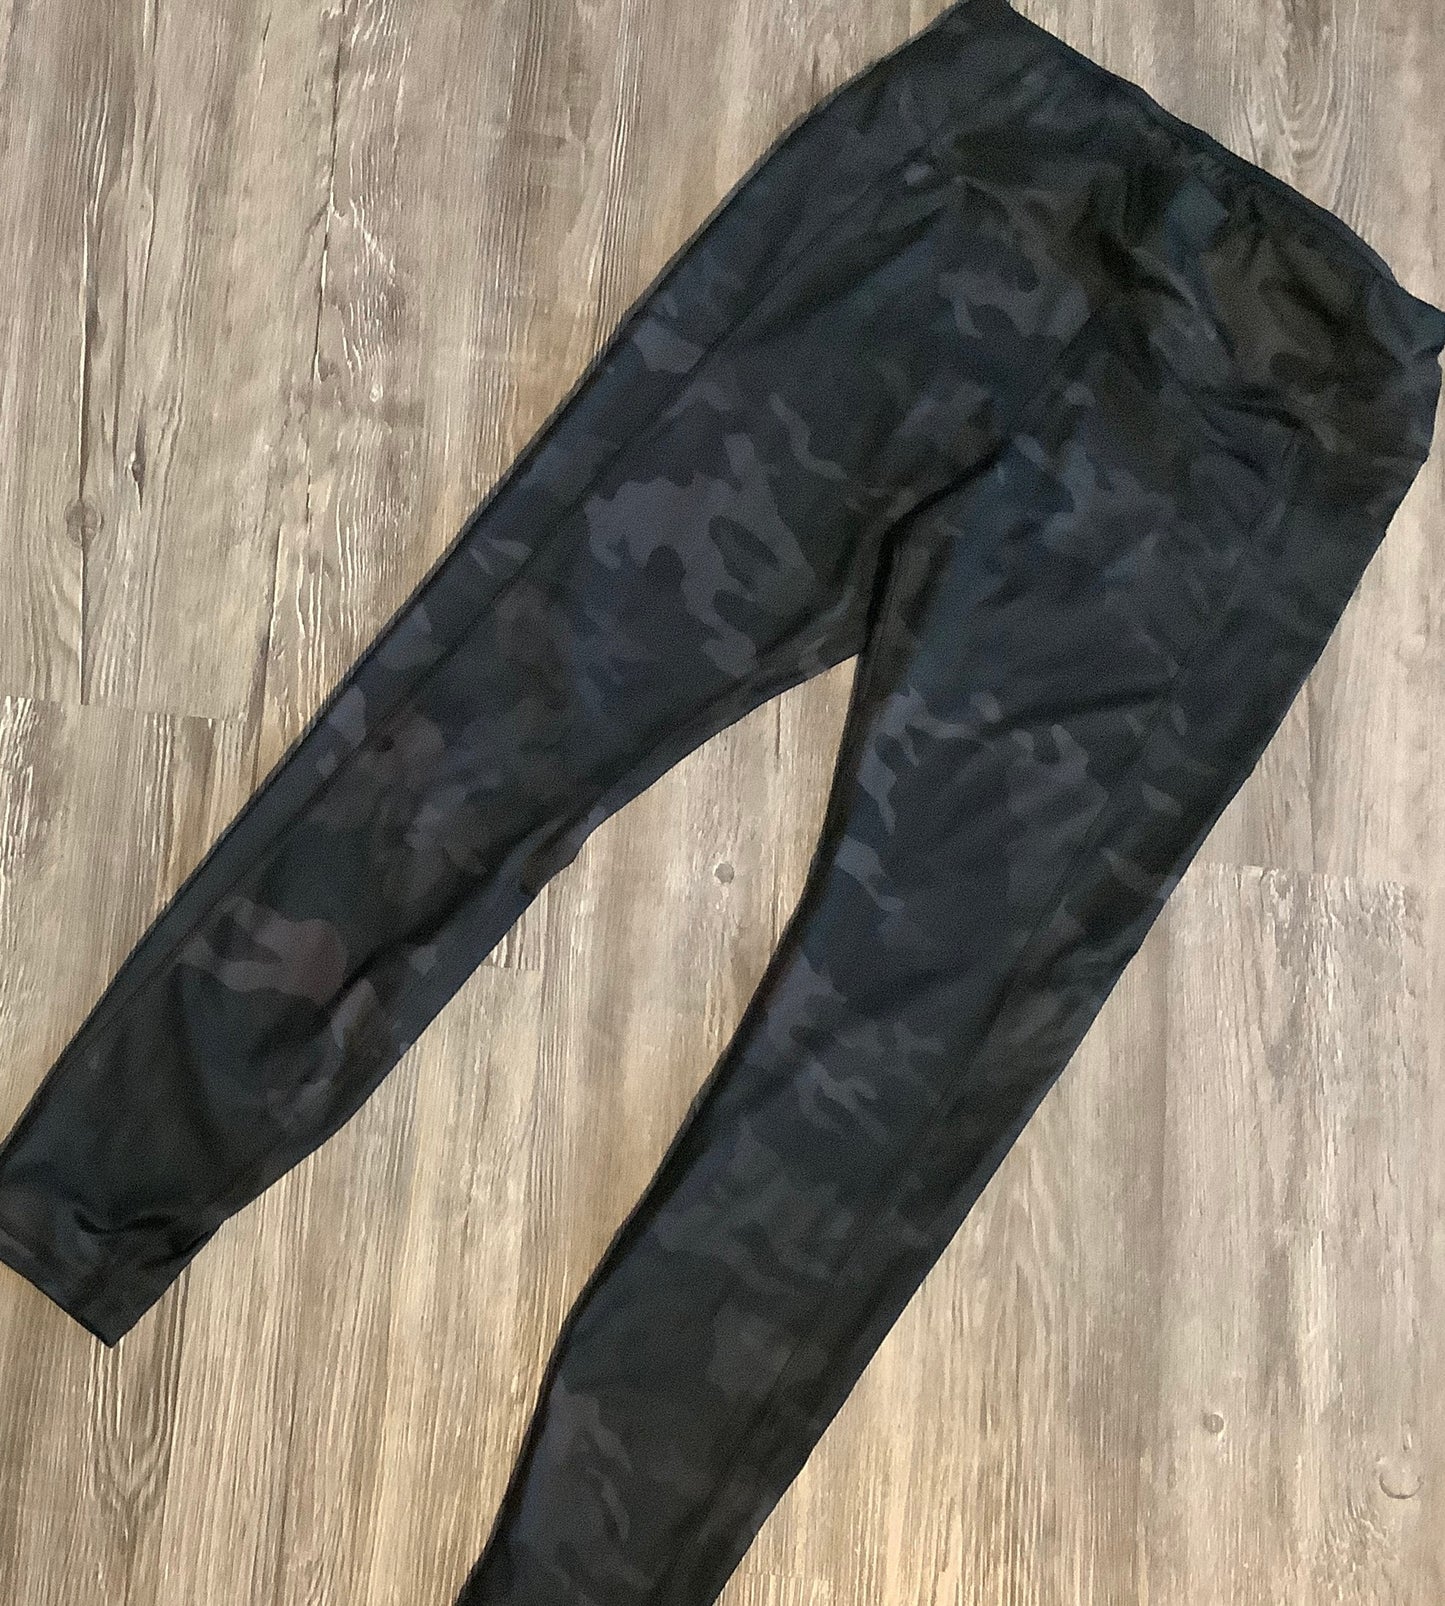 Athletic Leggings By Avia  Size: L